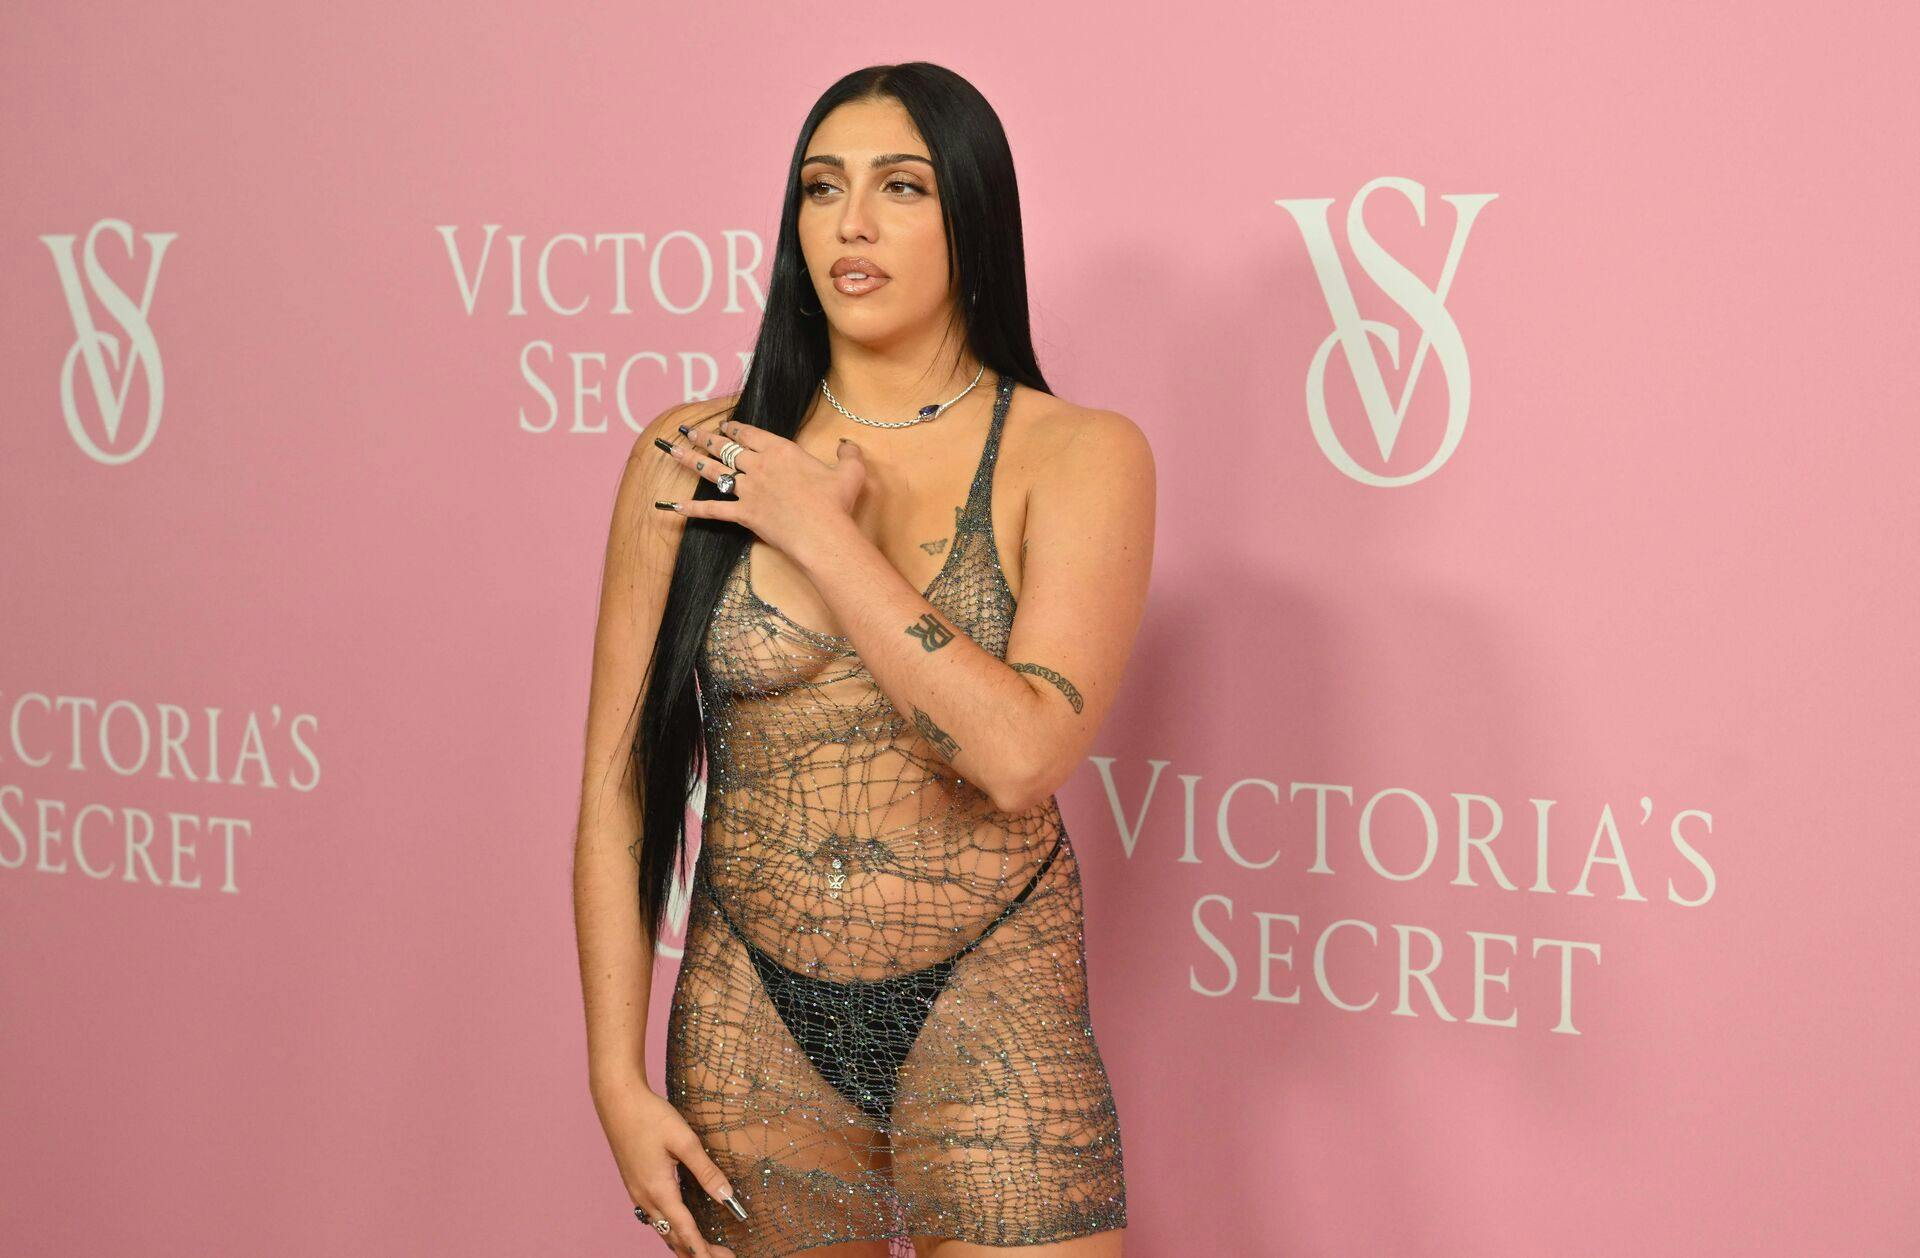 US model Lourdes Leon attends the Victoria's Secret New York Fashion Week kickoff event celebrating Victoria's Secret The Tour '23, at the Manhattan Center in New York City on September 6, 2023. (Photo by ANGELA WEISS / AFP)